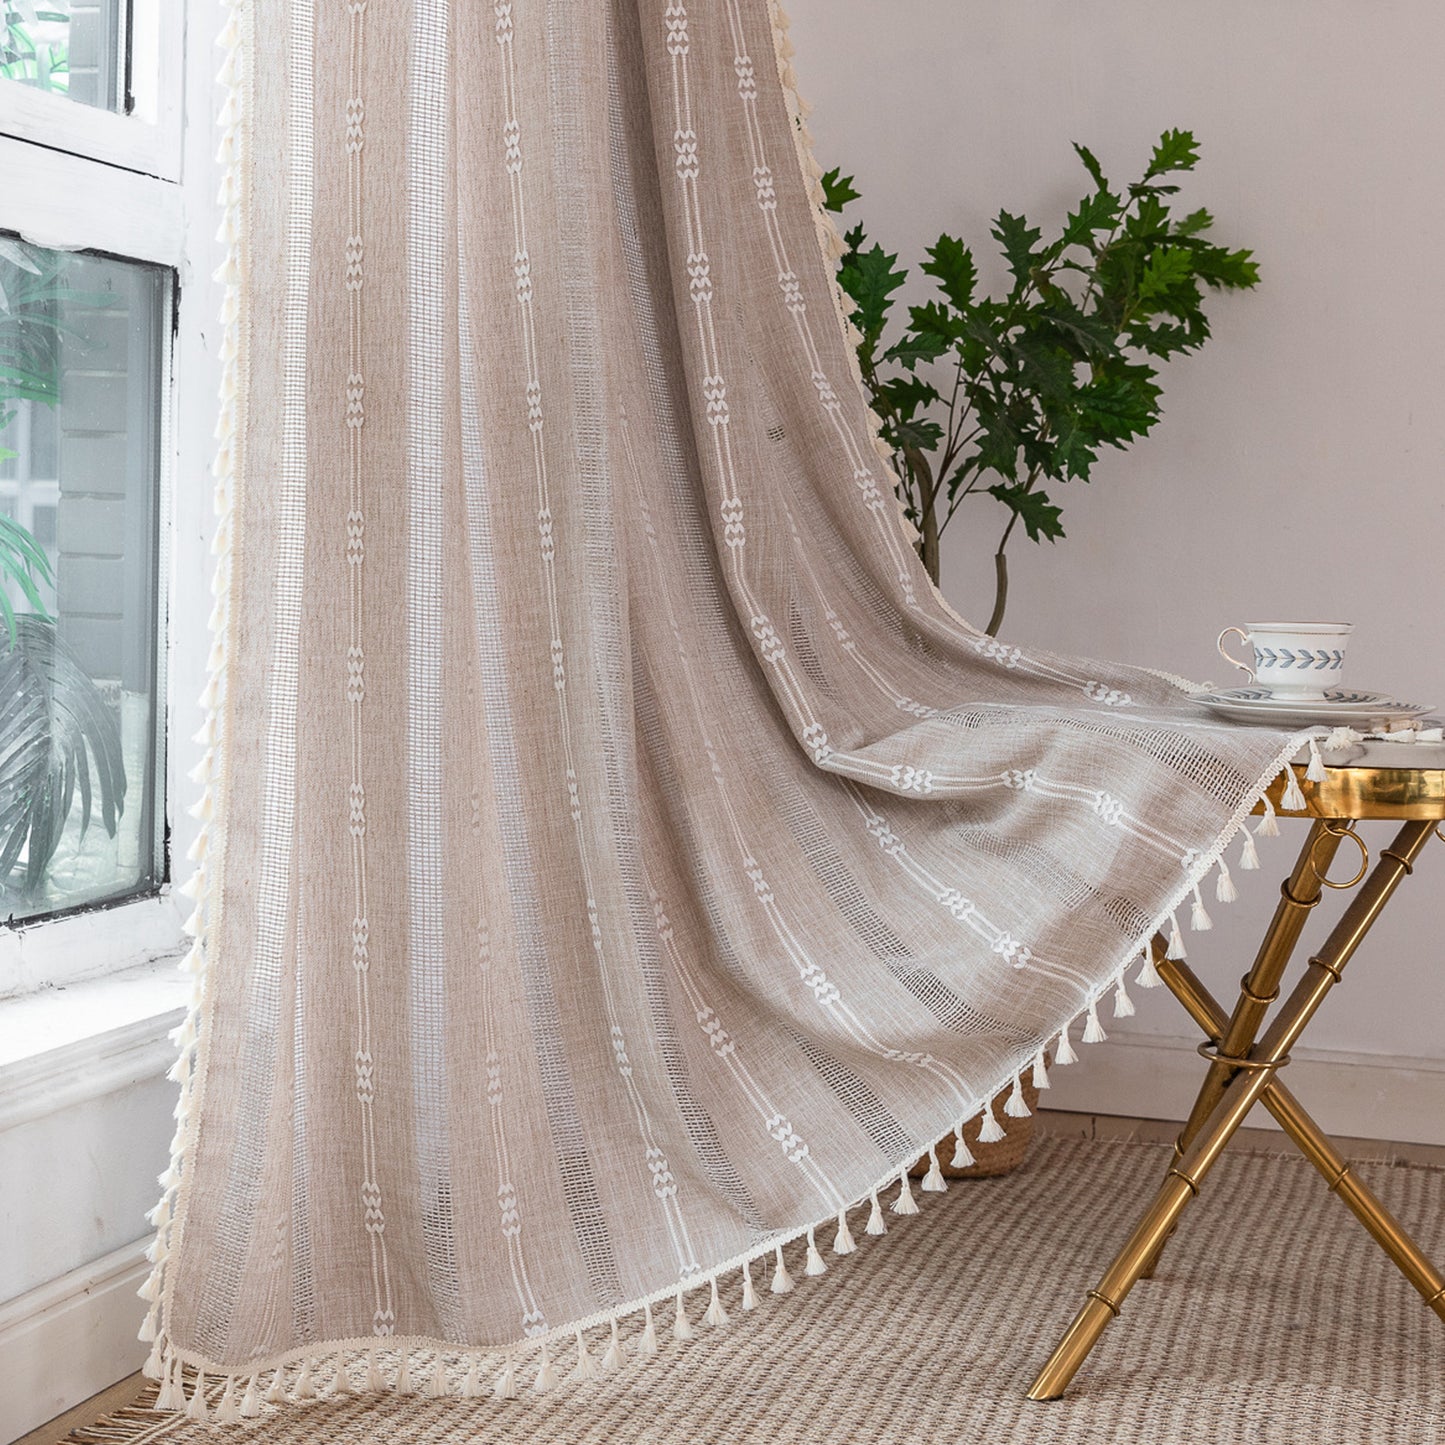 White French Striped Embroidered Line Semi Blackout Window Curtains